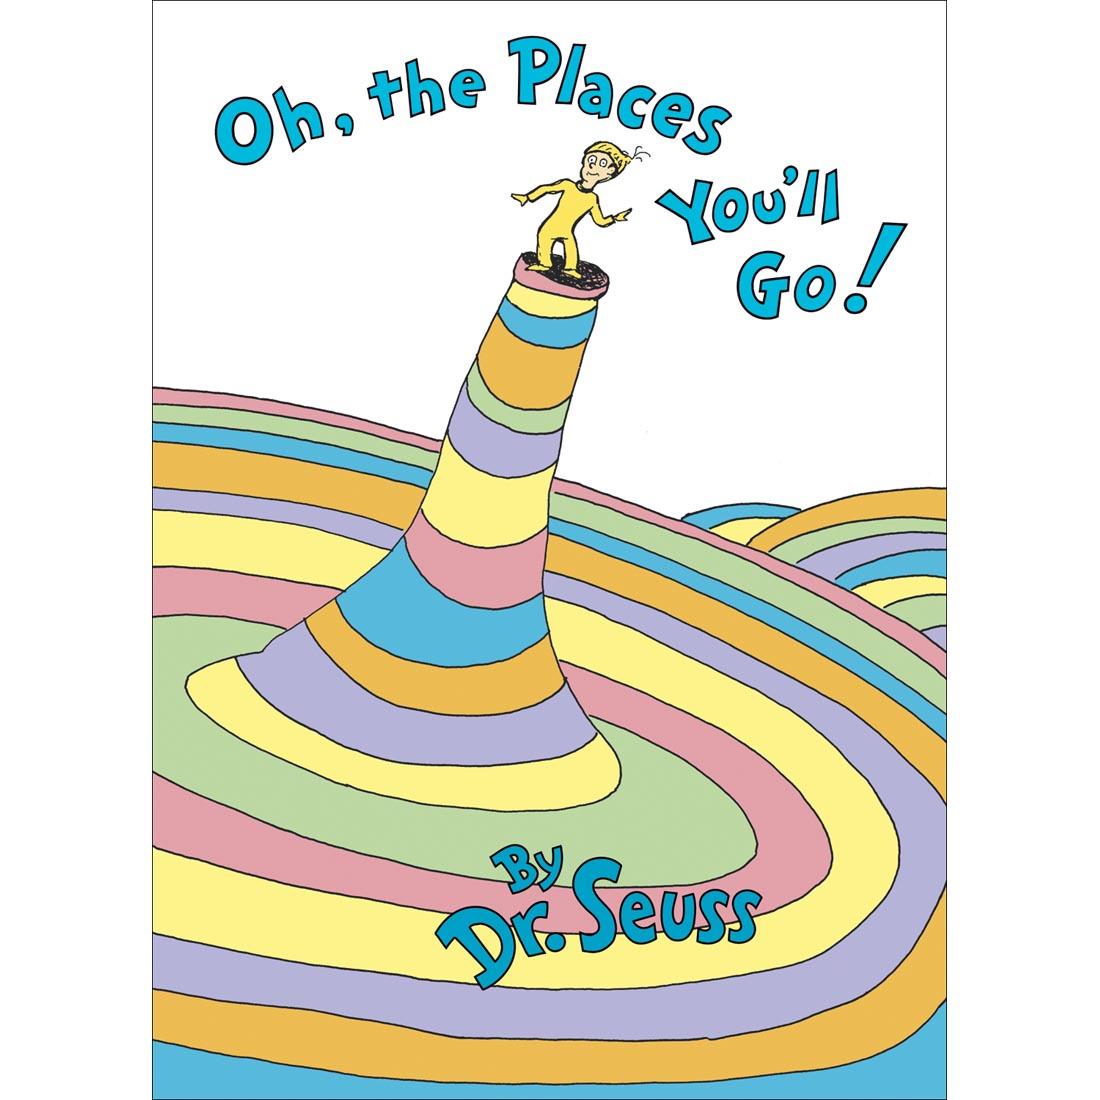 Oh, The Places You'll Go! by Dr. Seuss